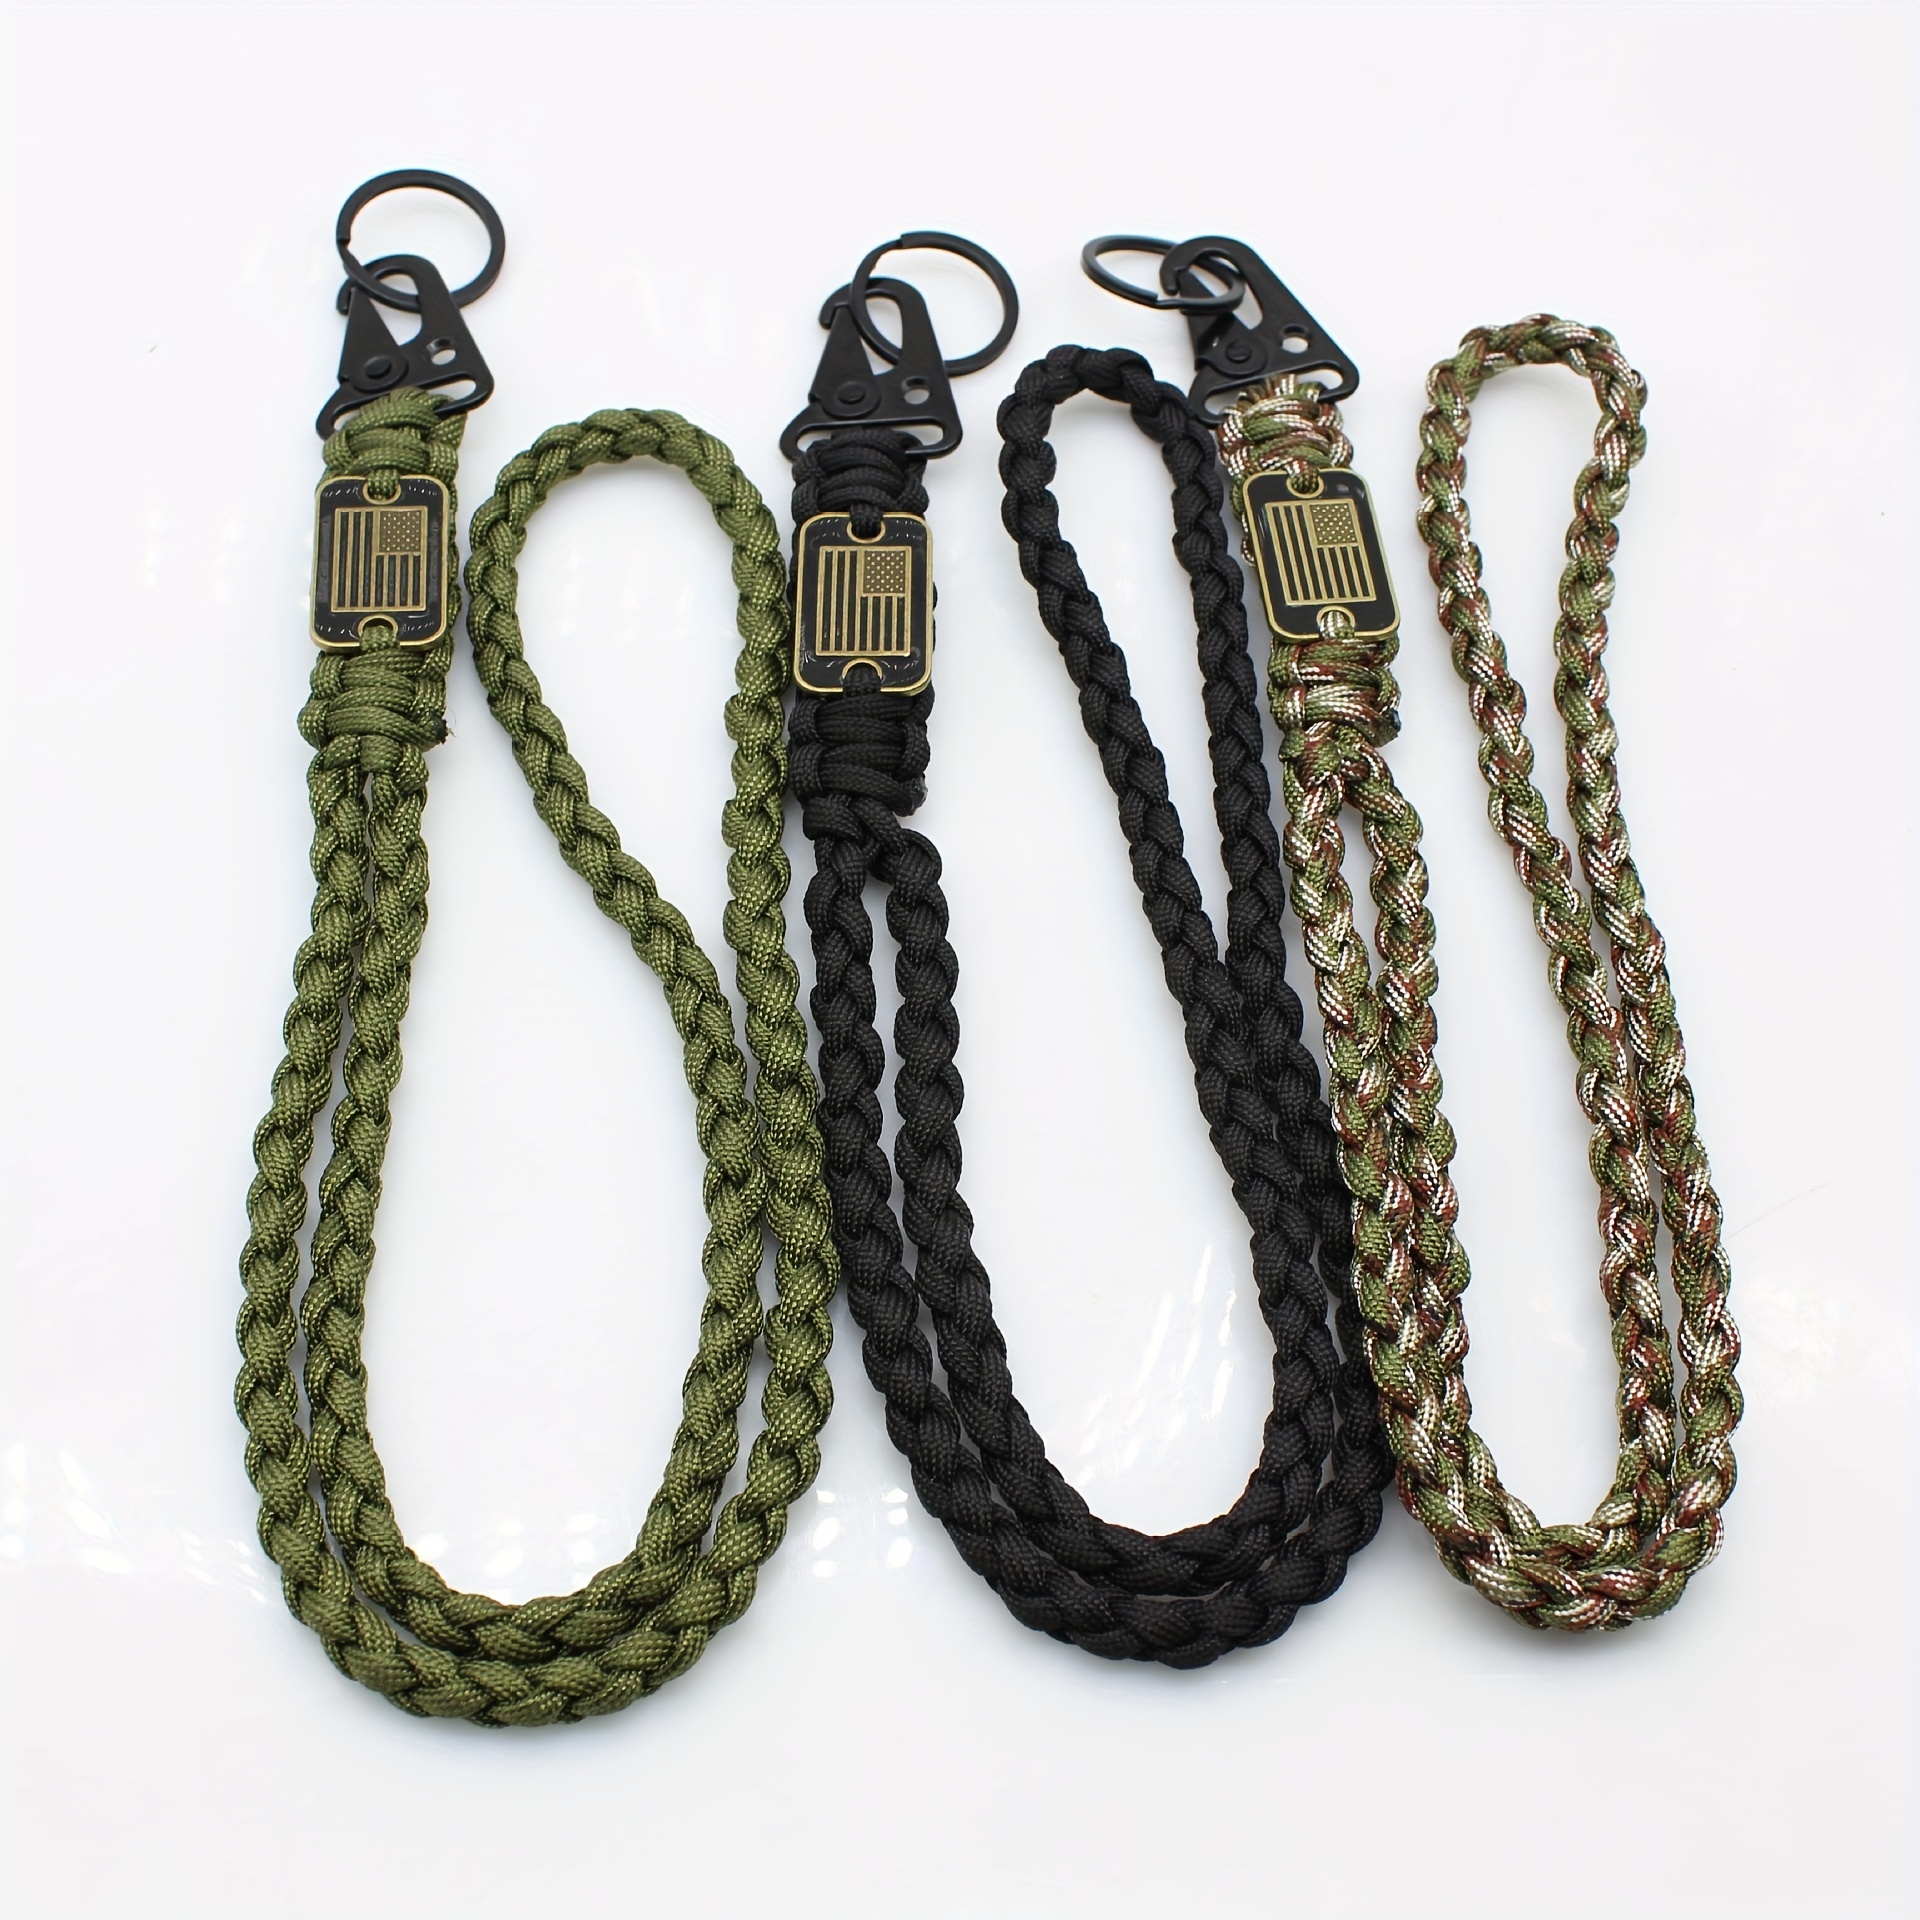 

Outdoor Paracord Keychain, Camping Mountaineering Paracord, Braided Mobile Phone Lanyard With Hook